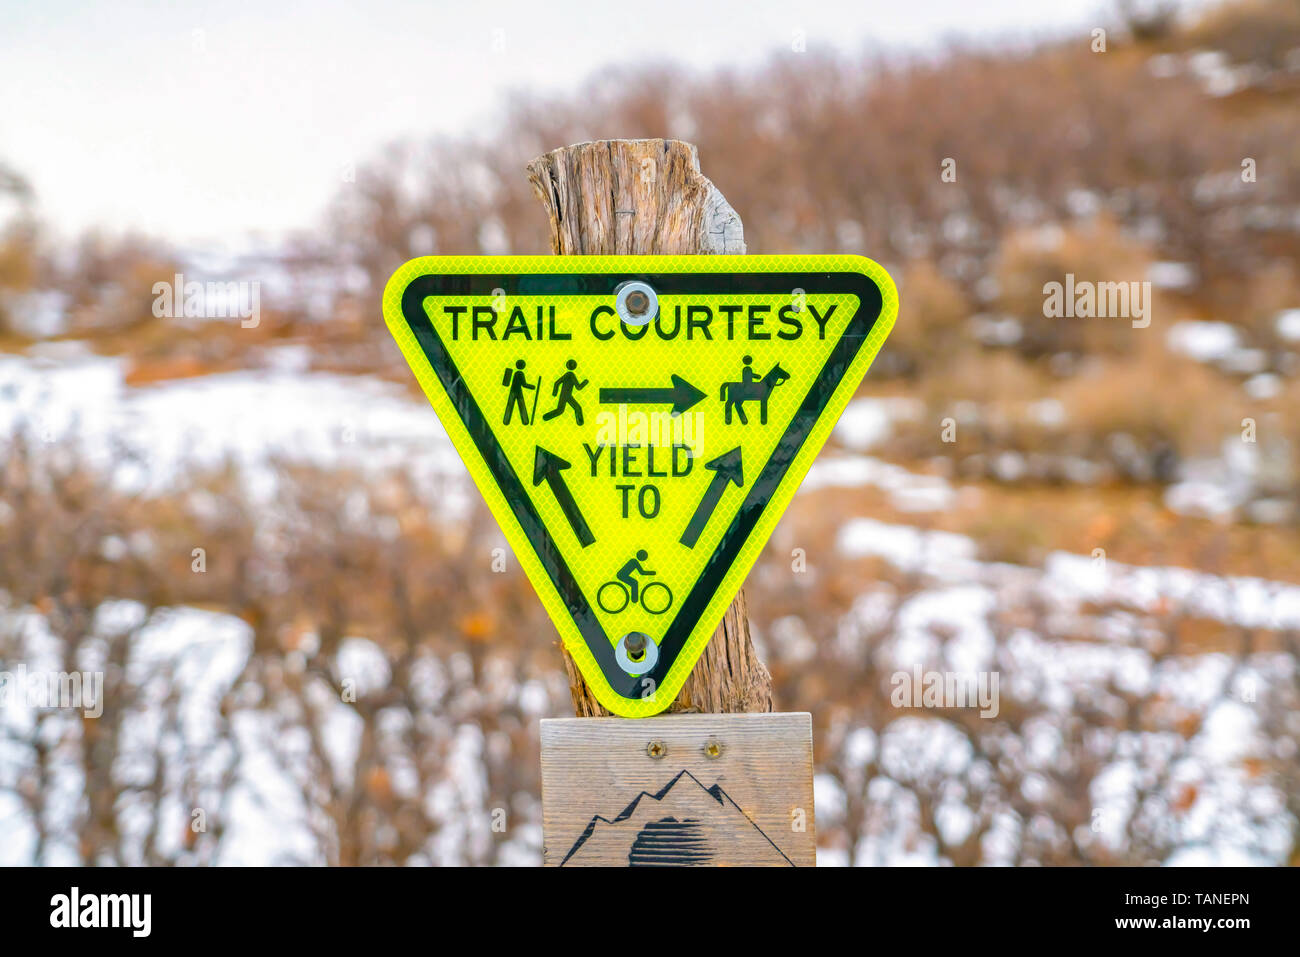 Inverted triangle Trail Courtesy Yield To sign with graphics and arrows. Trees on a snow covered landscape in winter can be seen in the blurred backgr Stock Photo